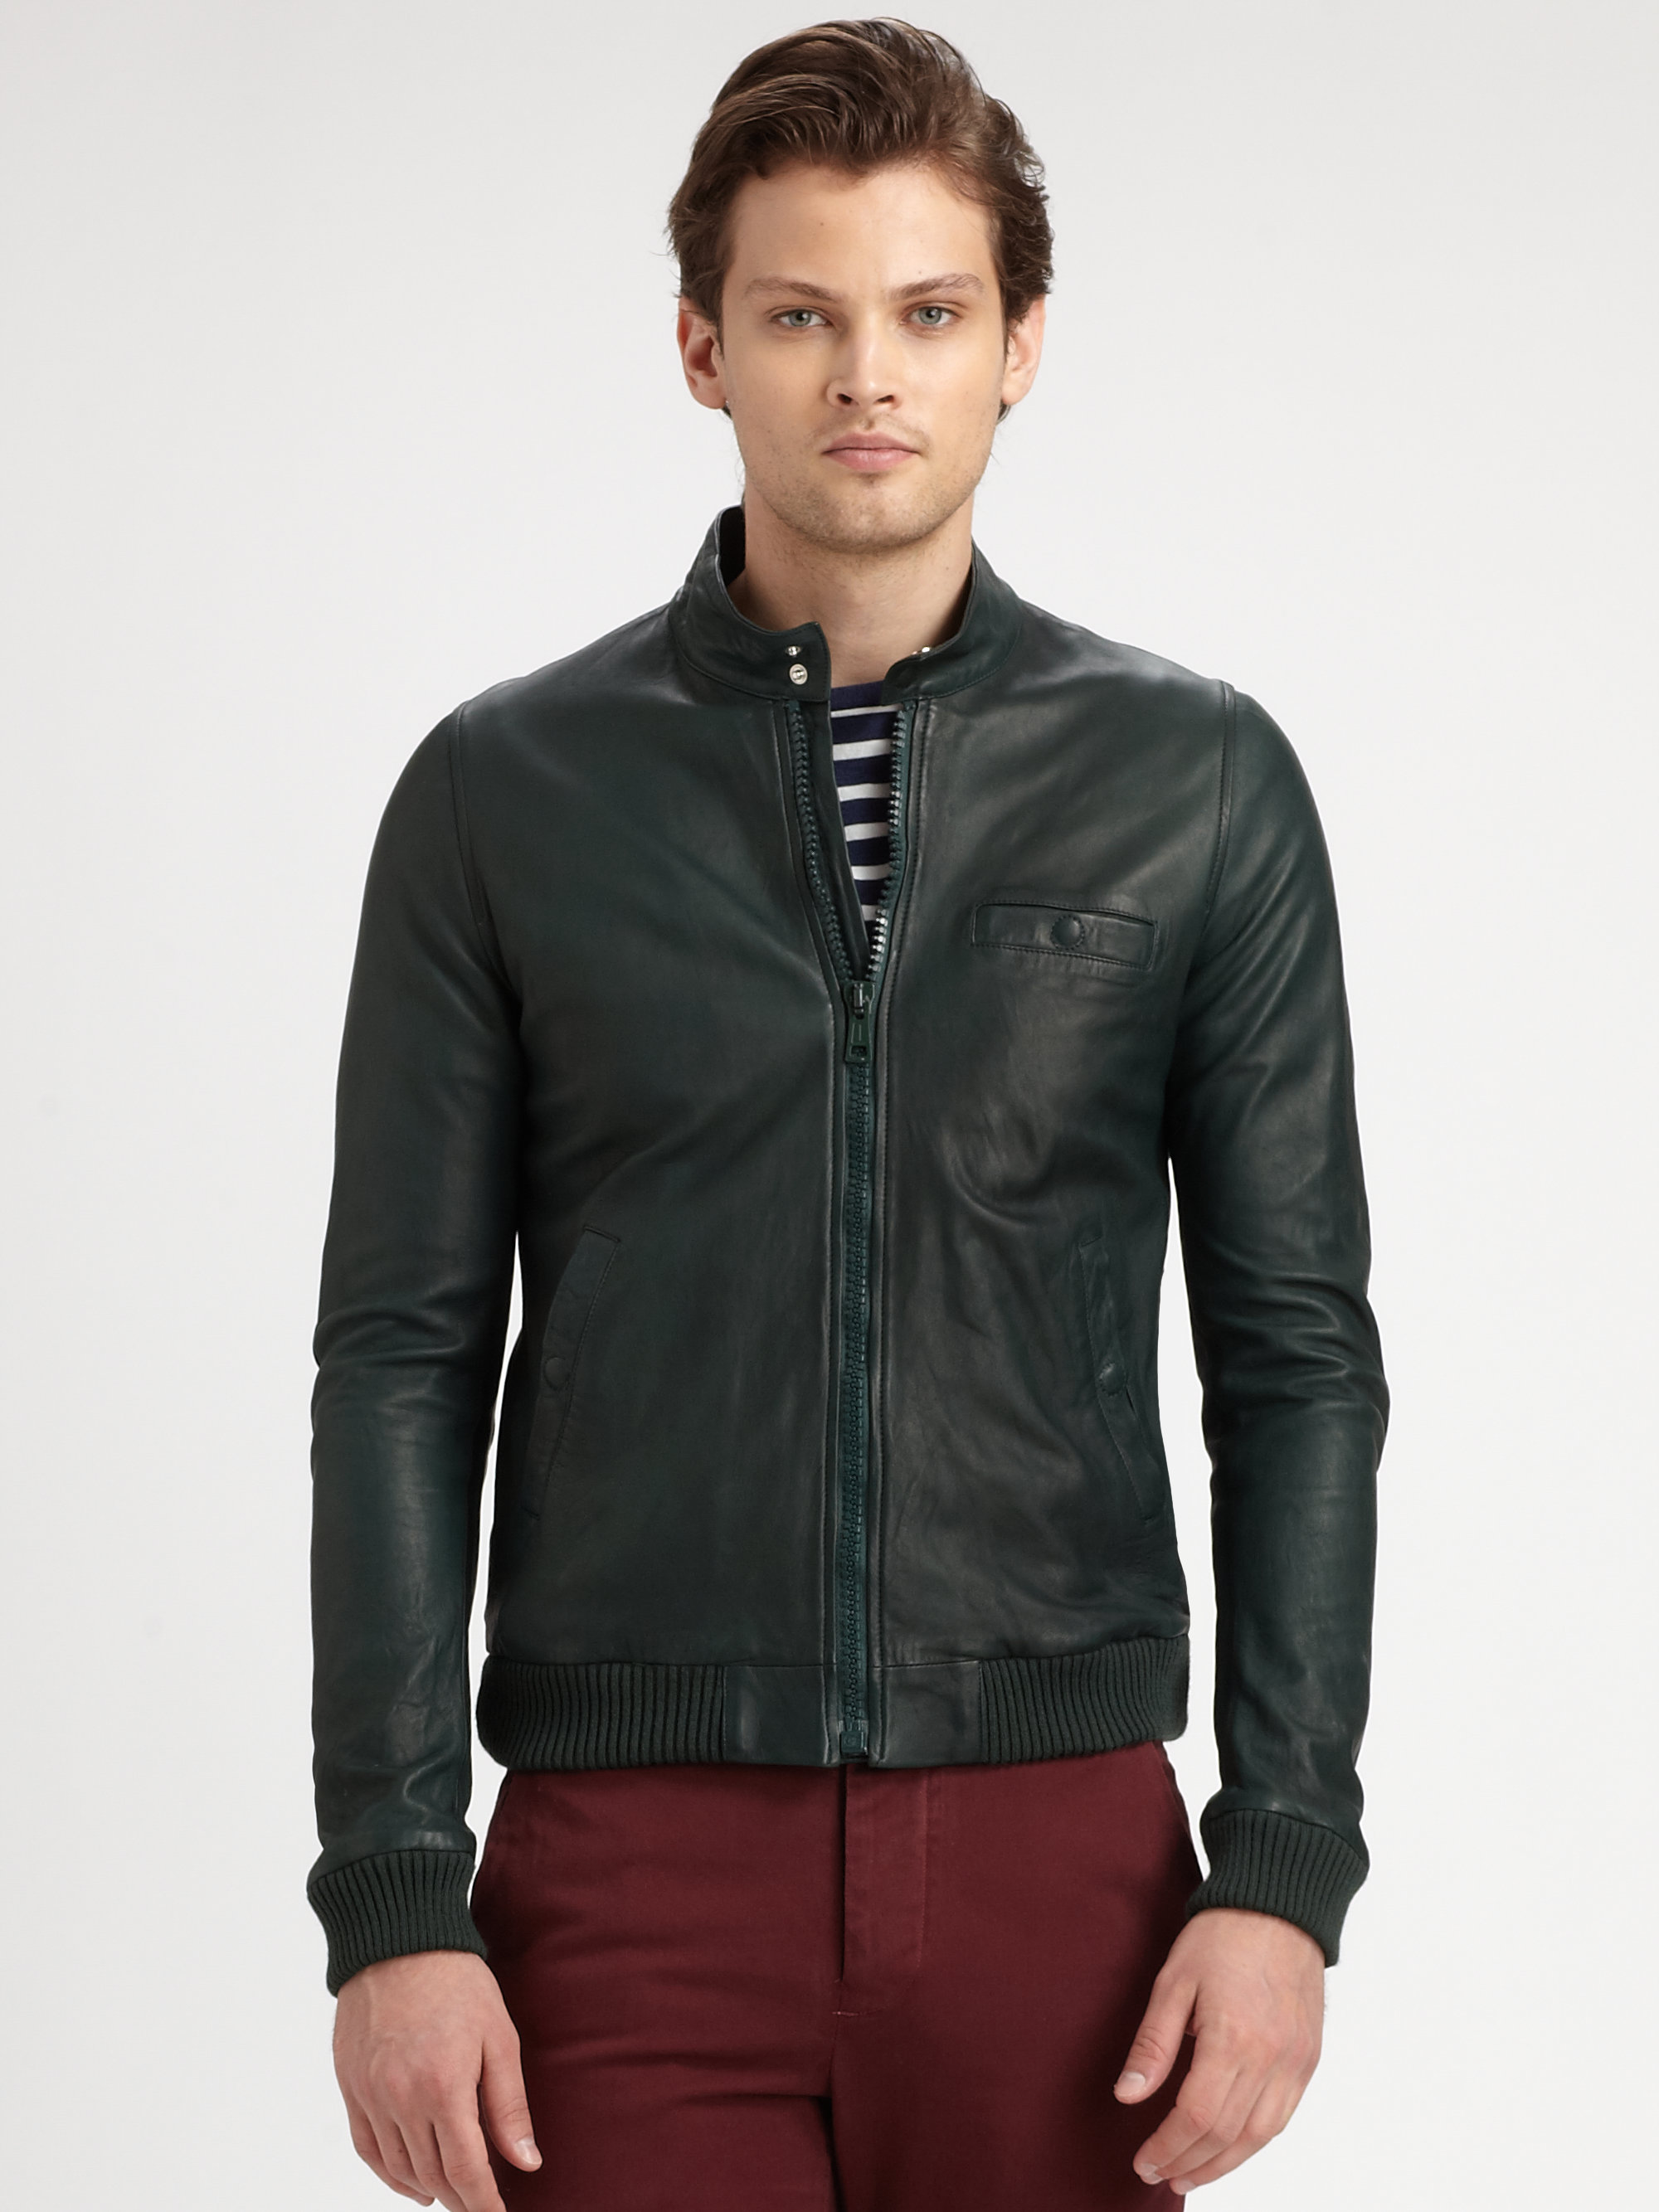 Lyst - Band Of Outsiders Leather Harrington Jacket in Black for Men